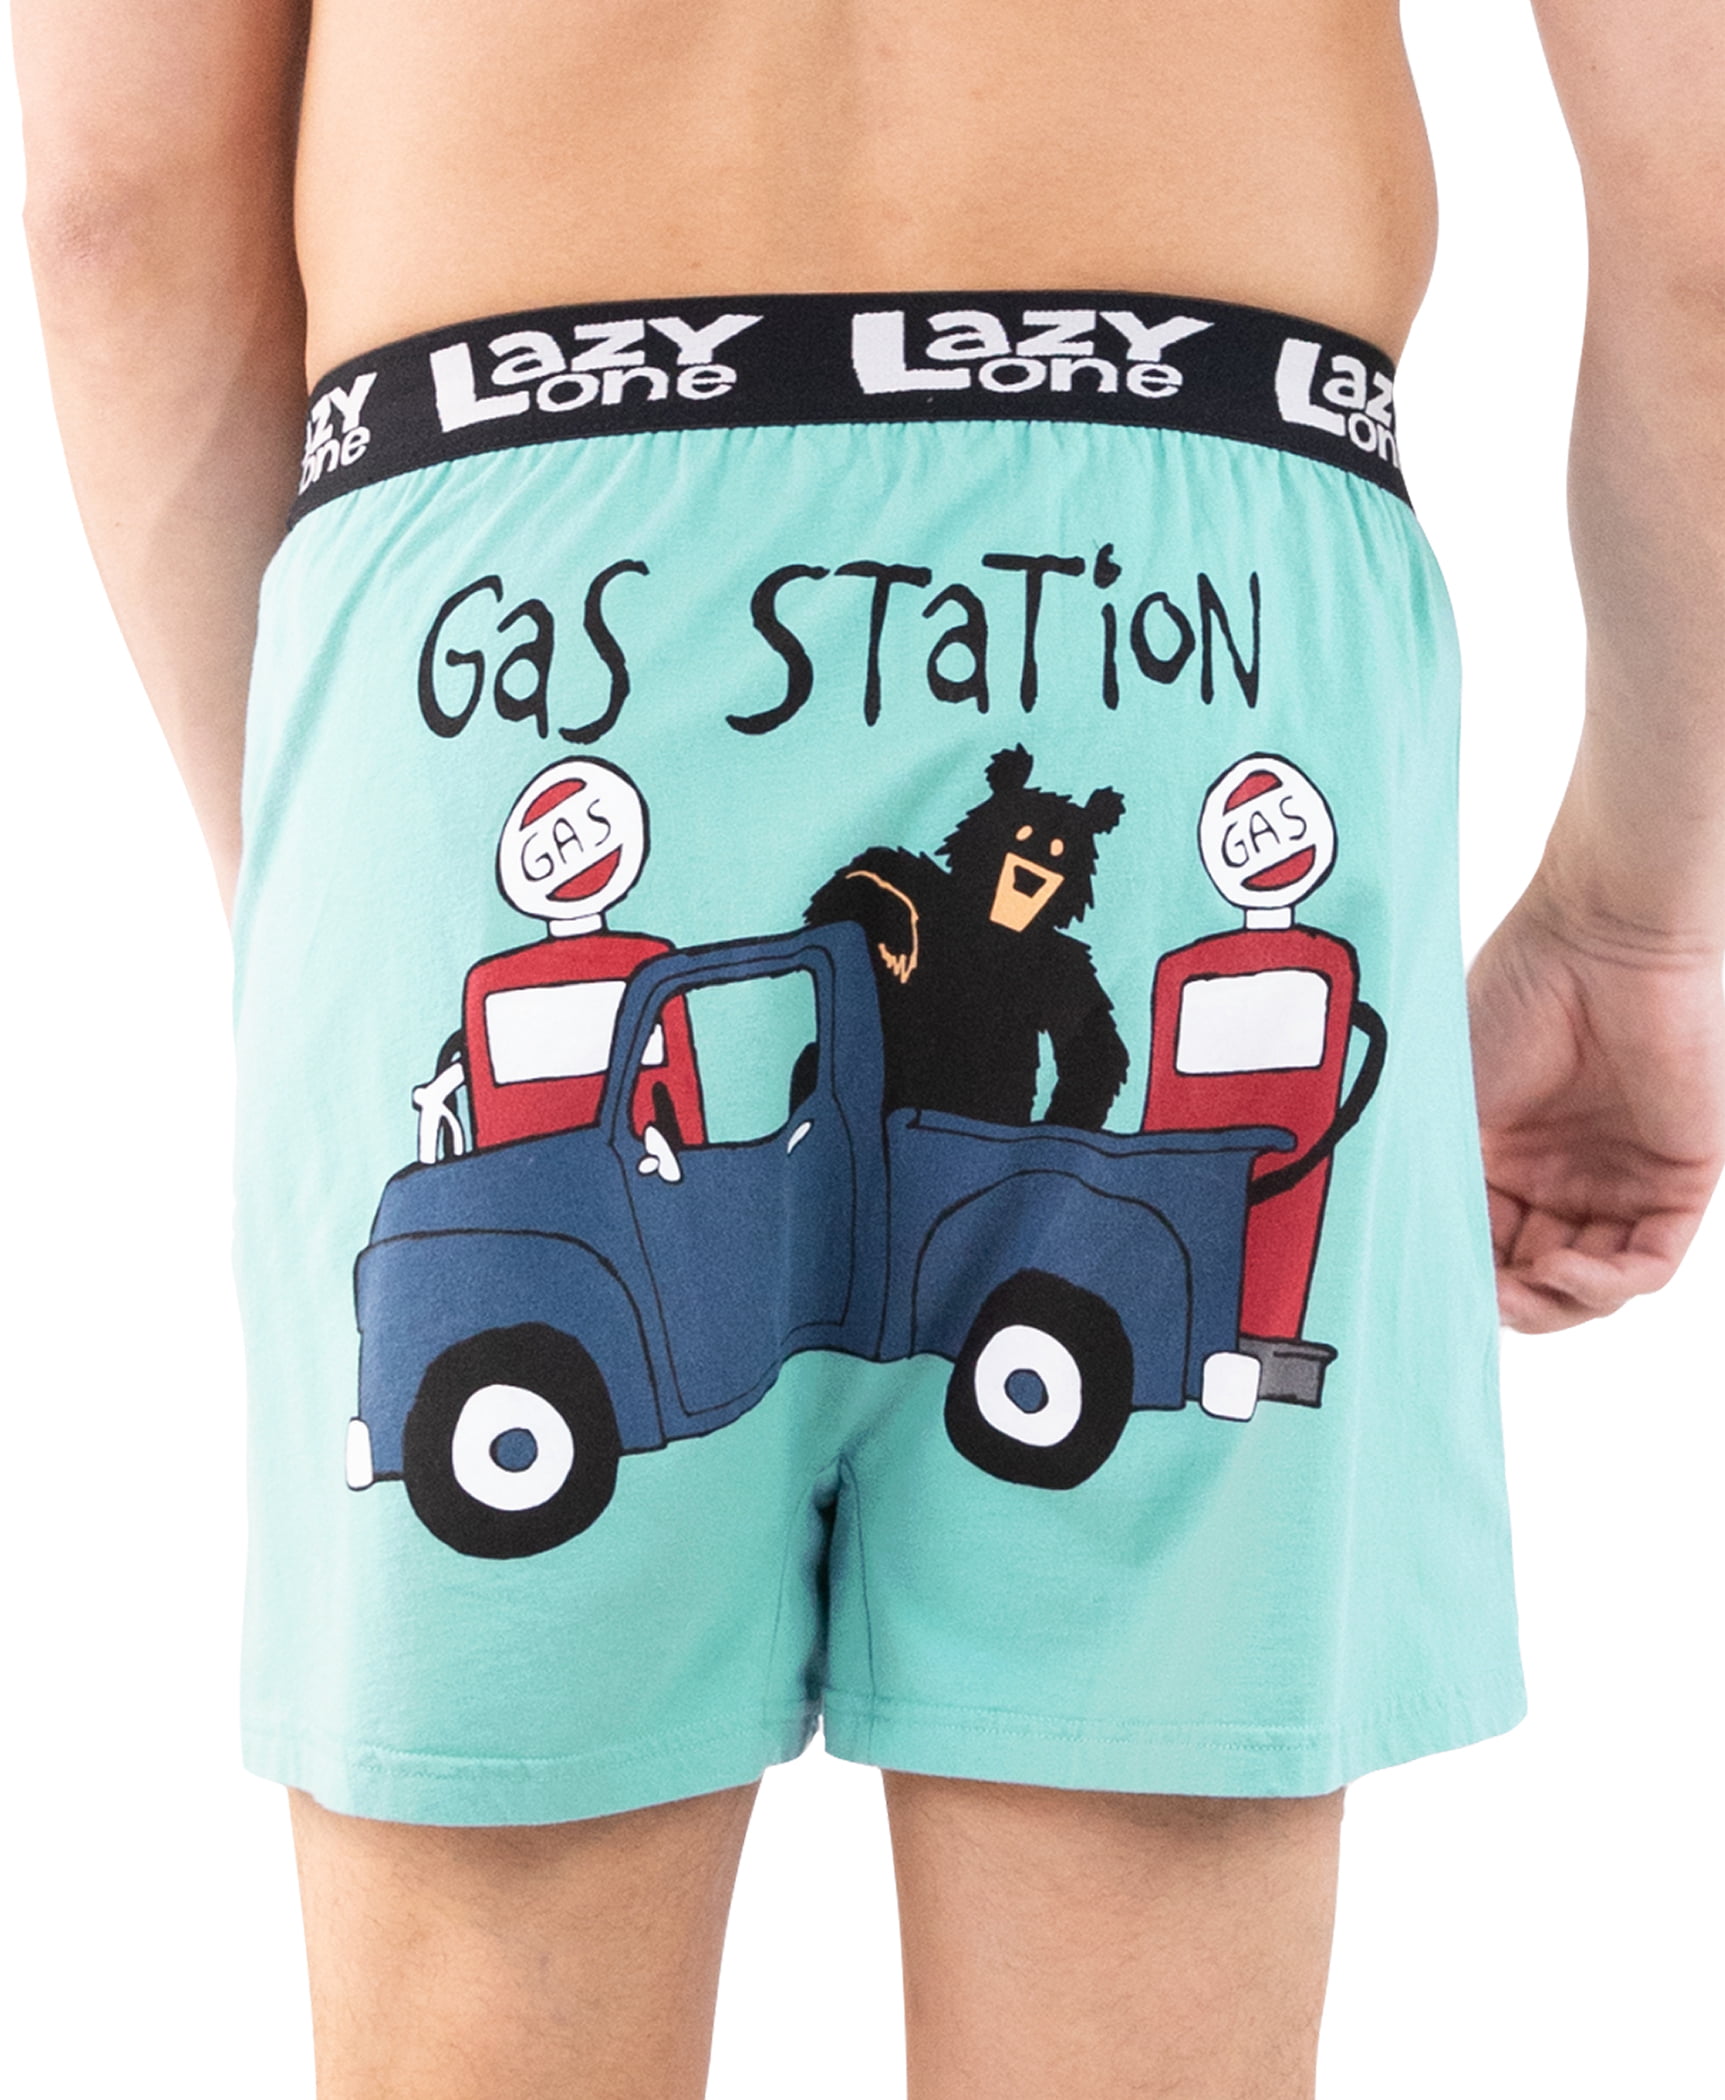 Gag Gifts for Men Novelty Boxer Shorts Humorous Underwear Lazy One Funny Boxers Bear Designs 